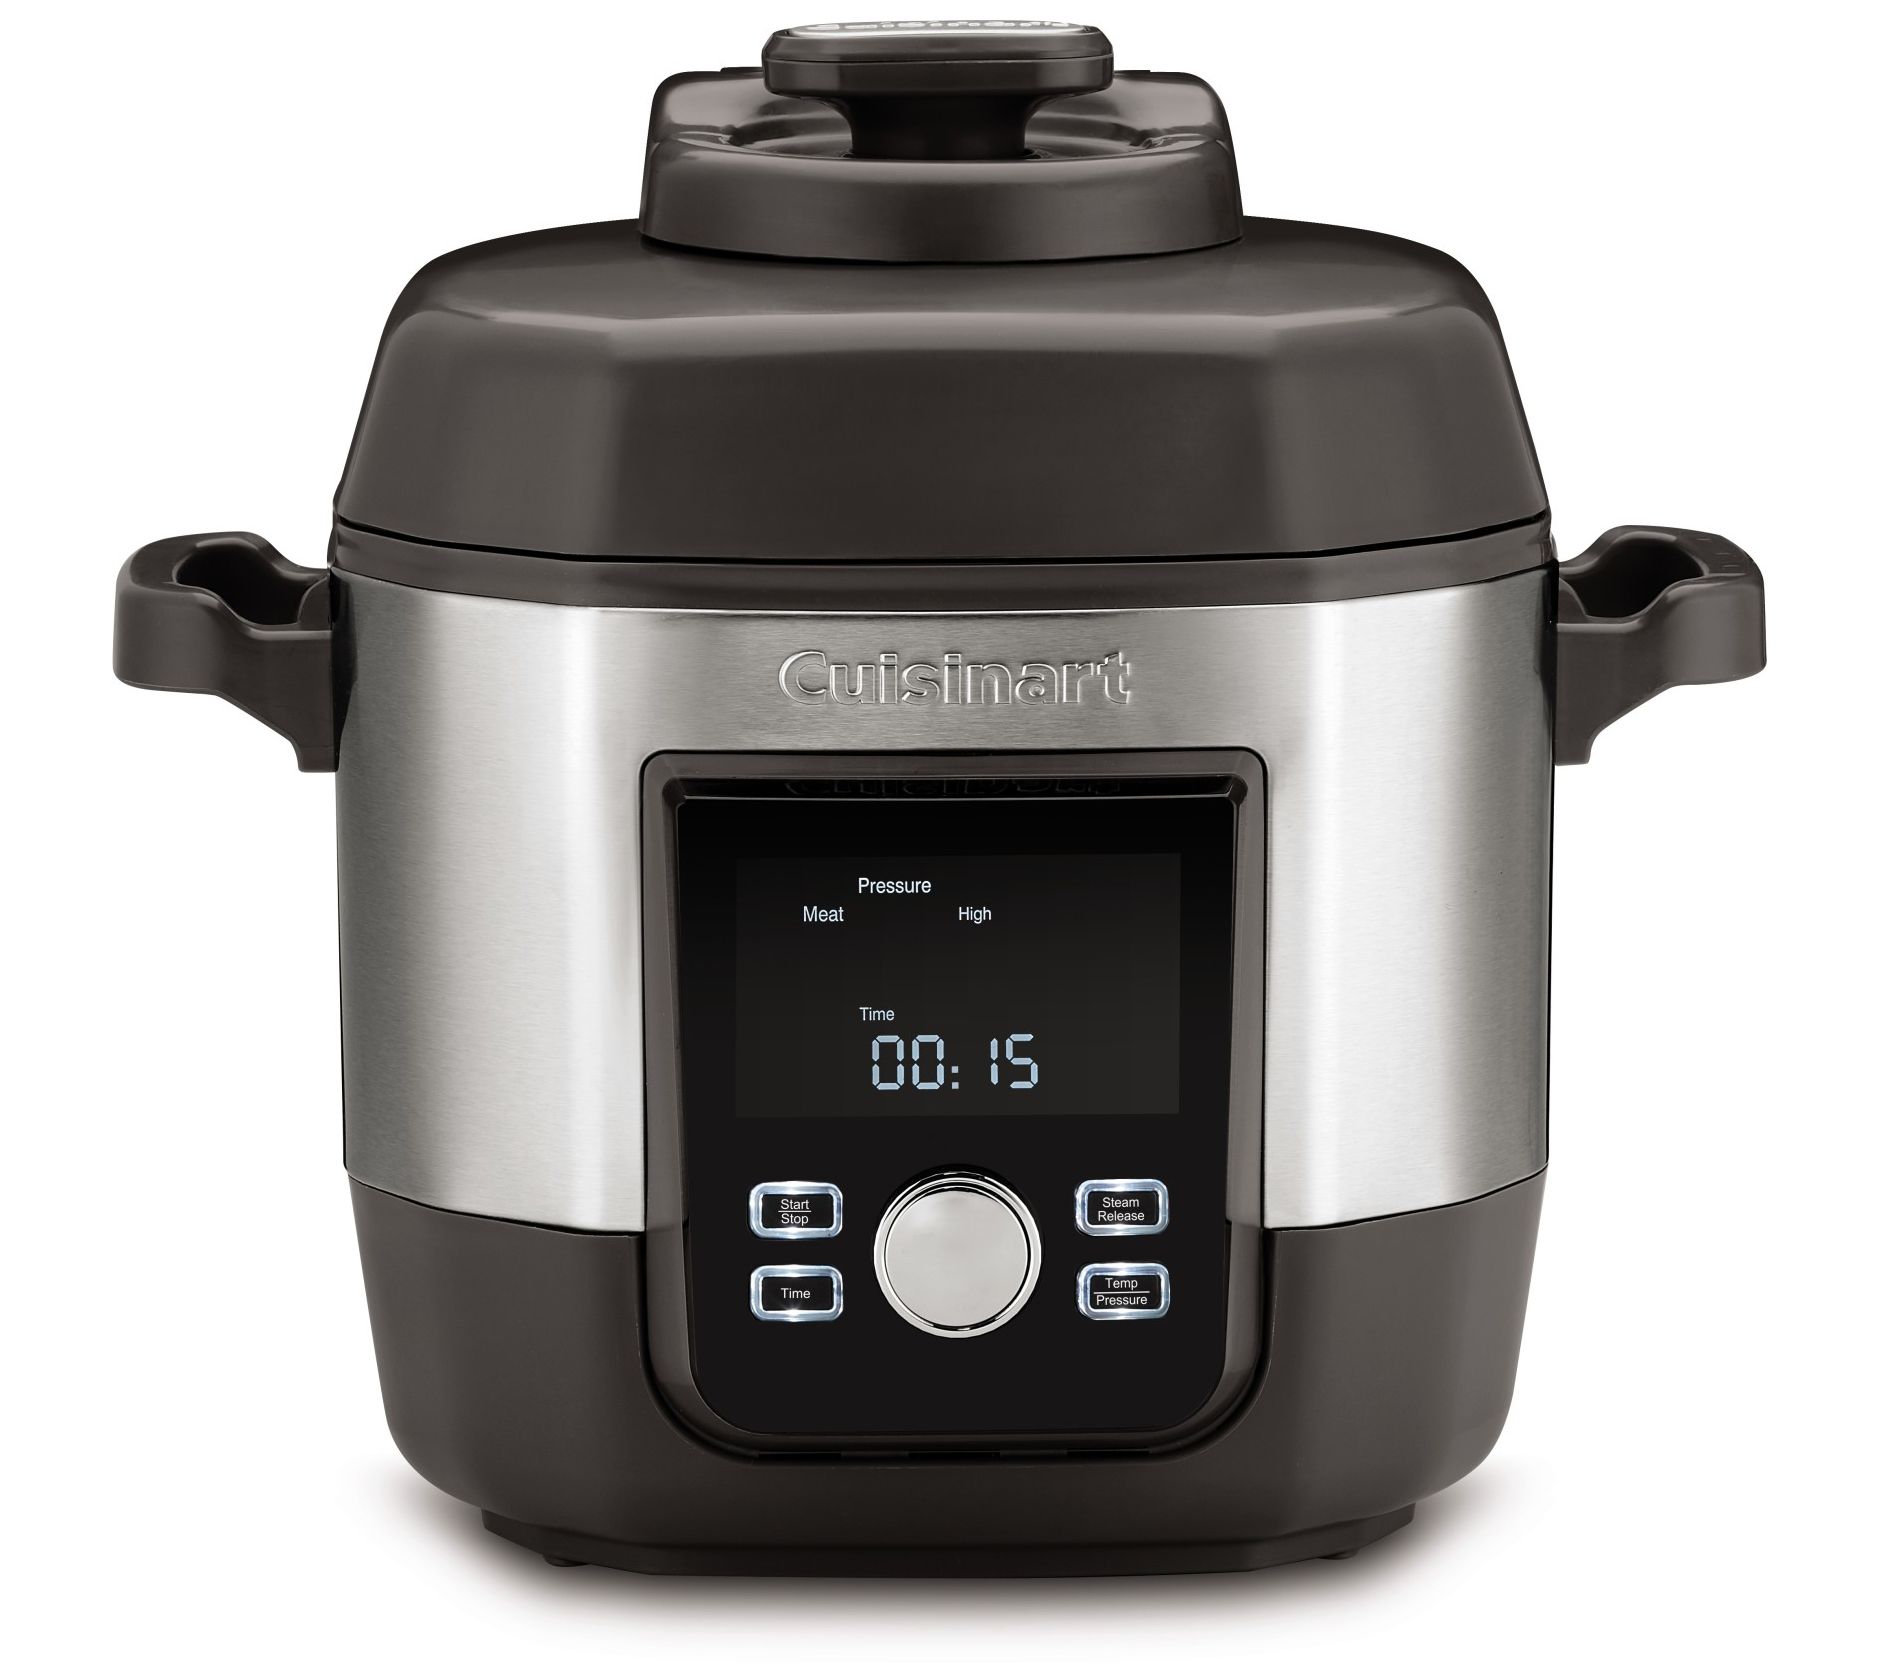 Brentwood Appliances 6-quart 8-in-1 Easy Pot Electric Multicooker 